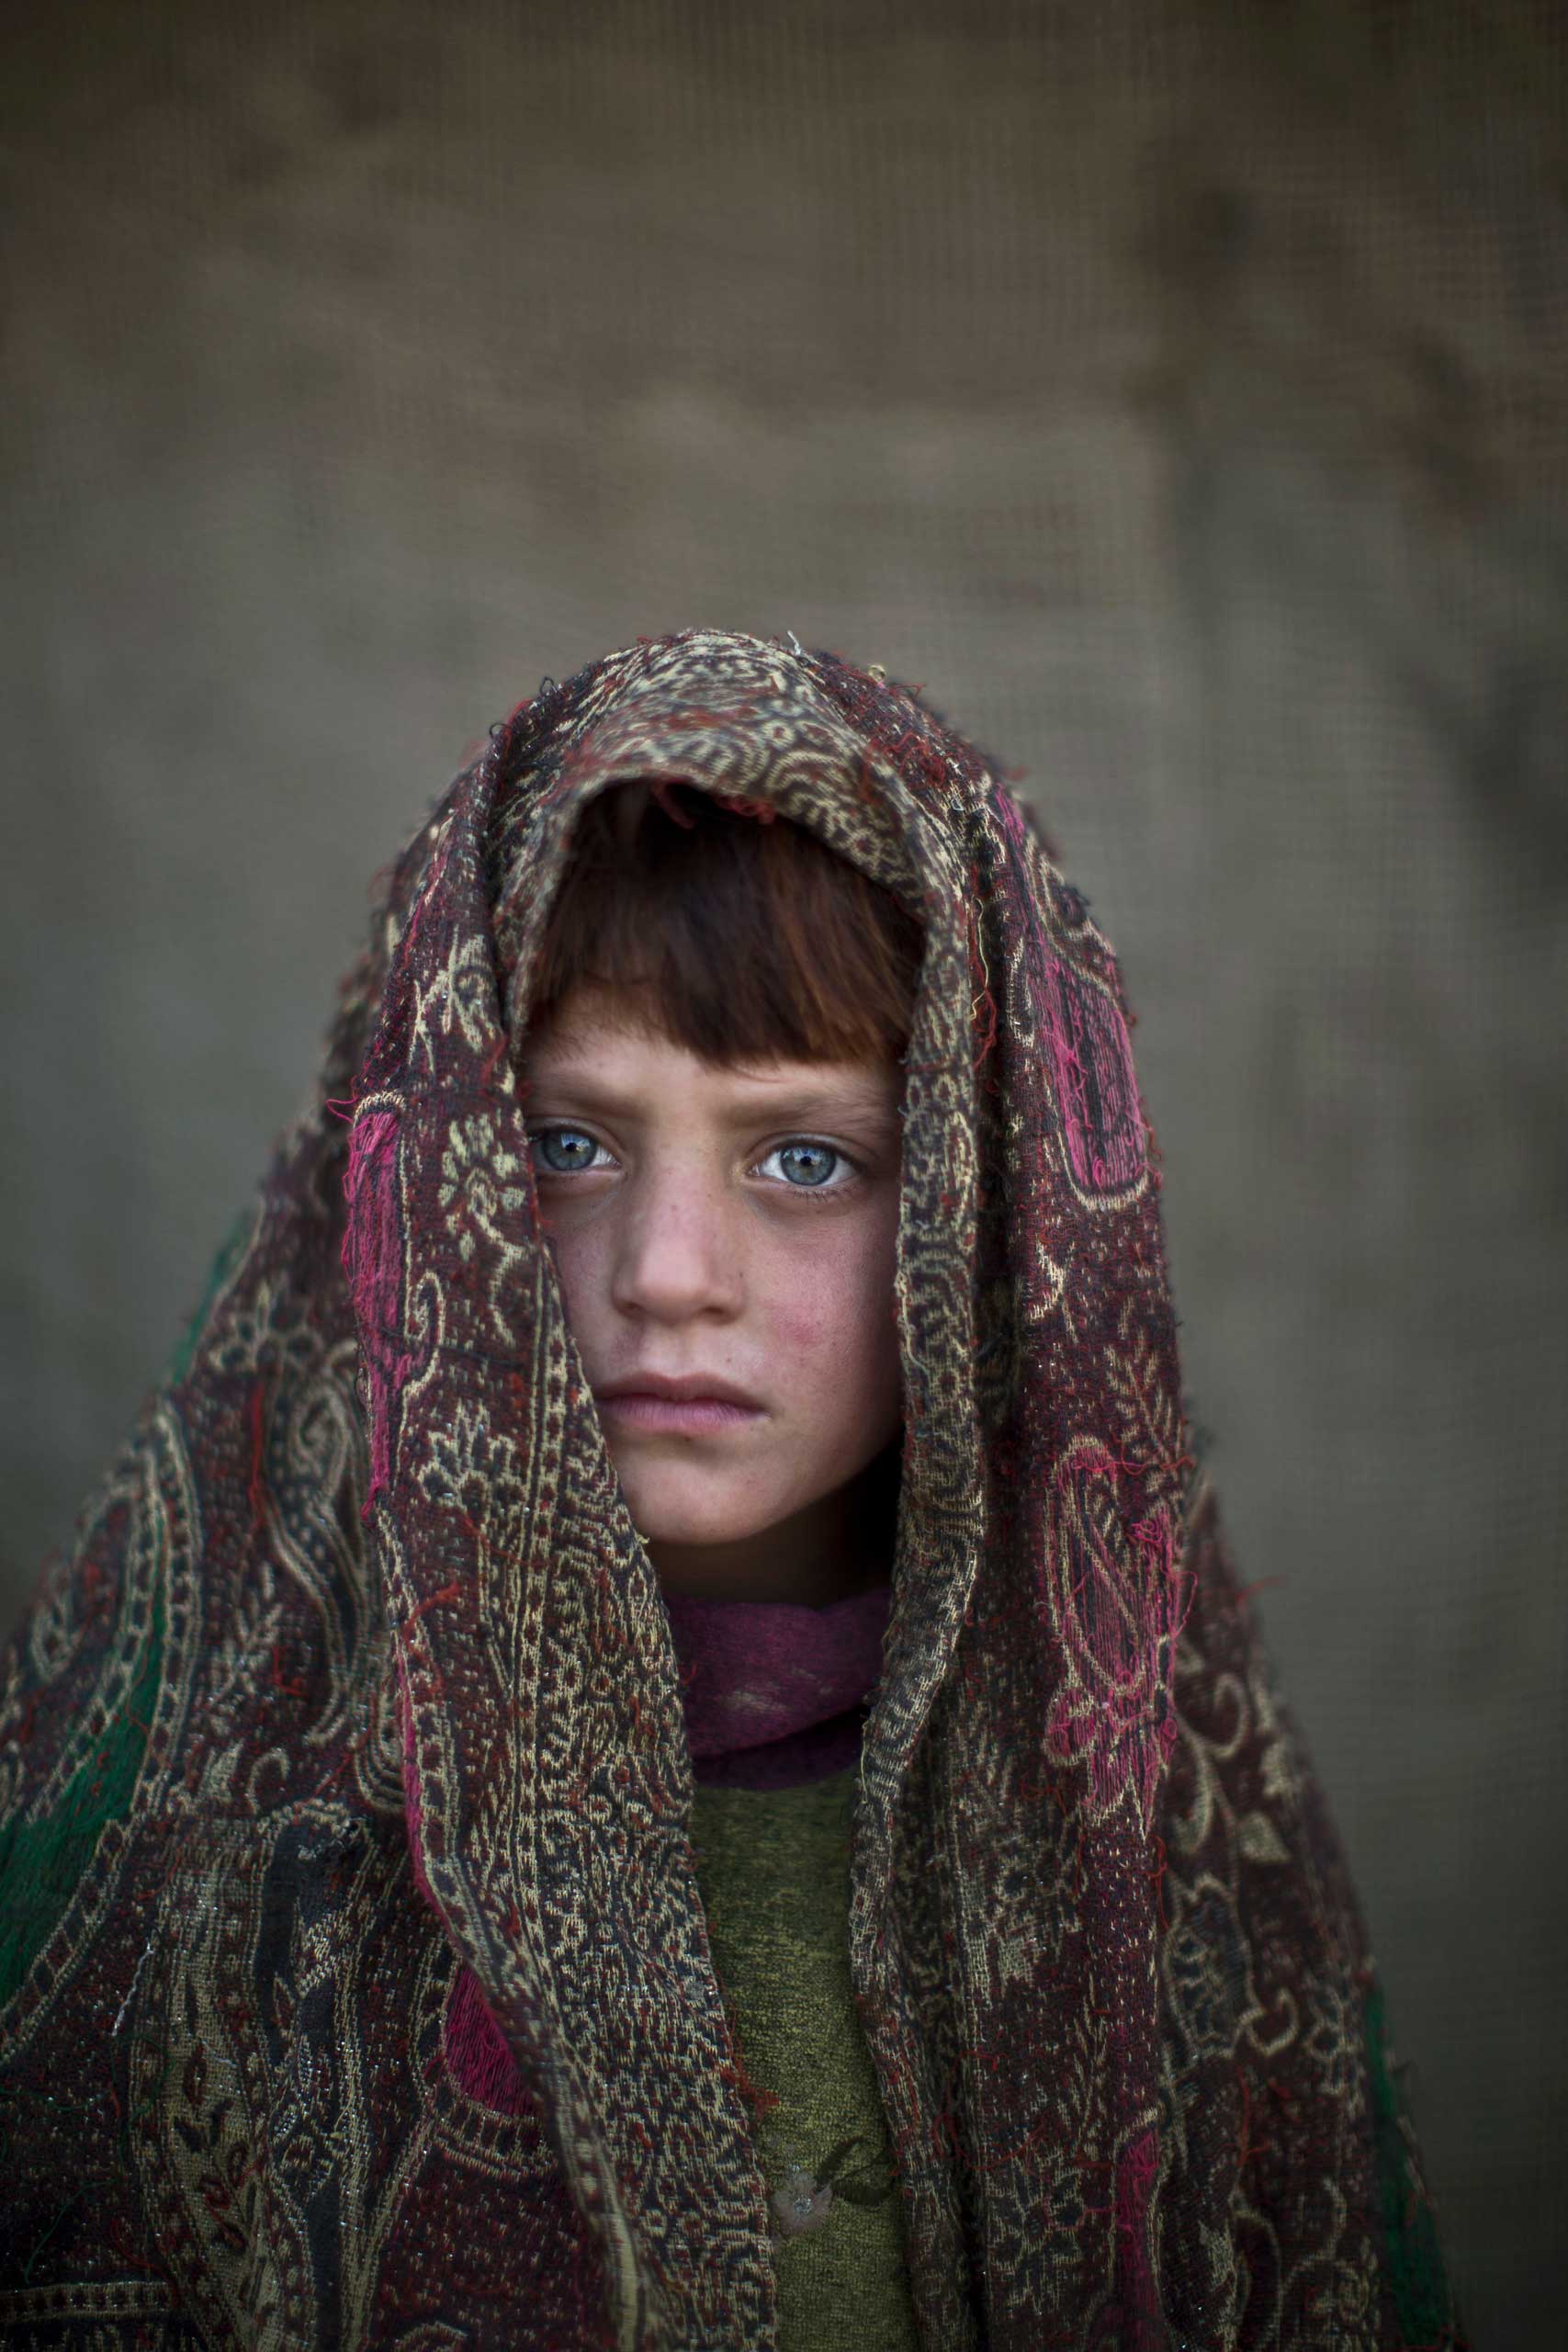 Afghan refugee girl, Naseebah Zarghoul, 6, poses for a picture, while playing with other children in a slum on the outskirts of Islamabad, Pakistan. Jan. 24, 2014.